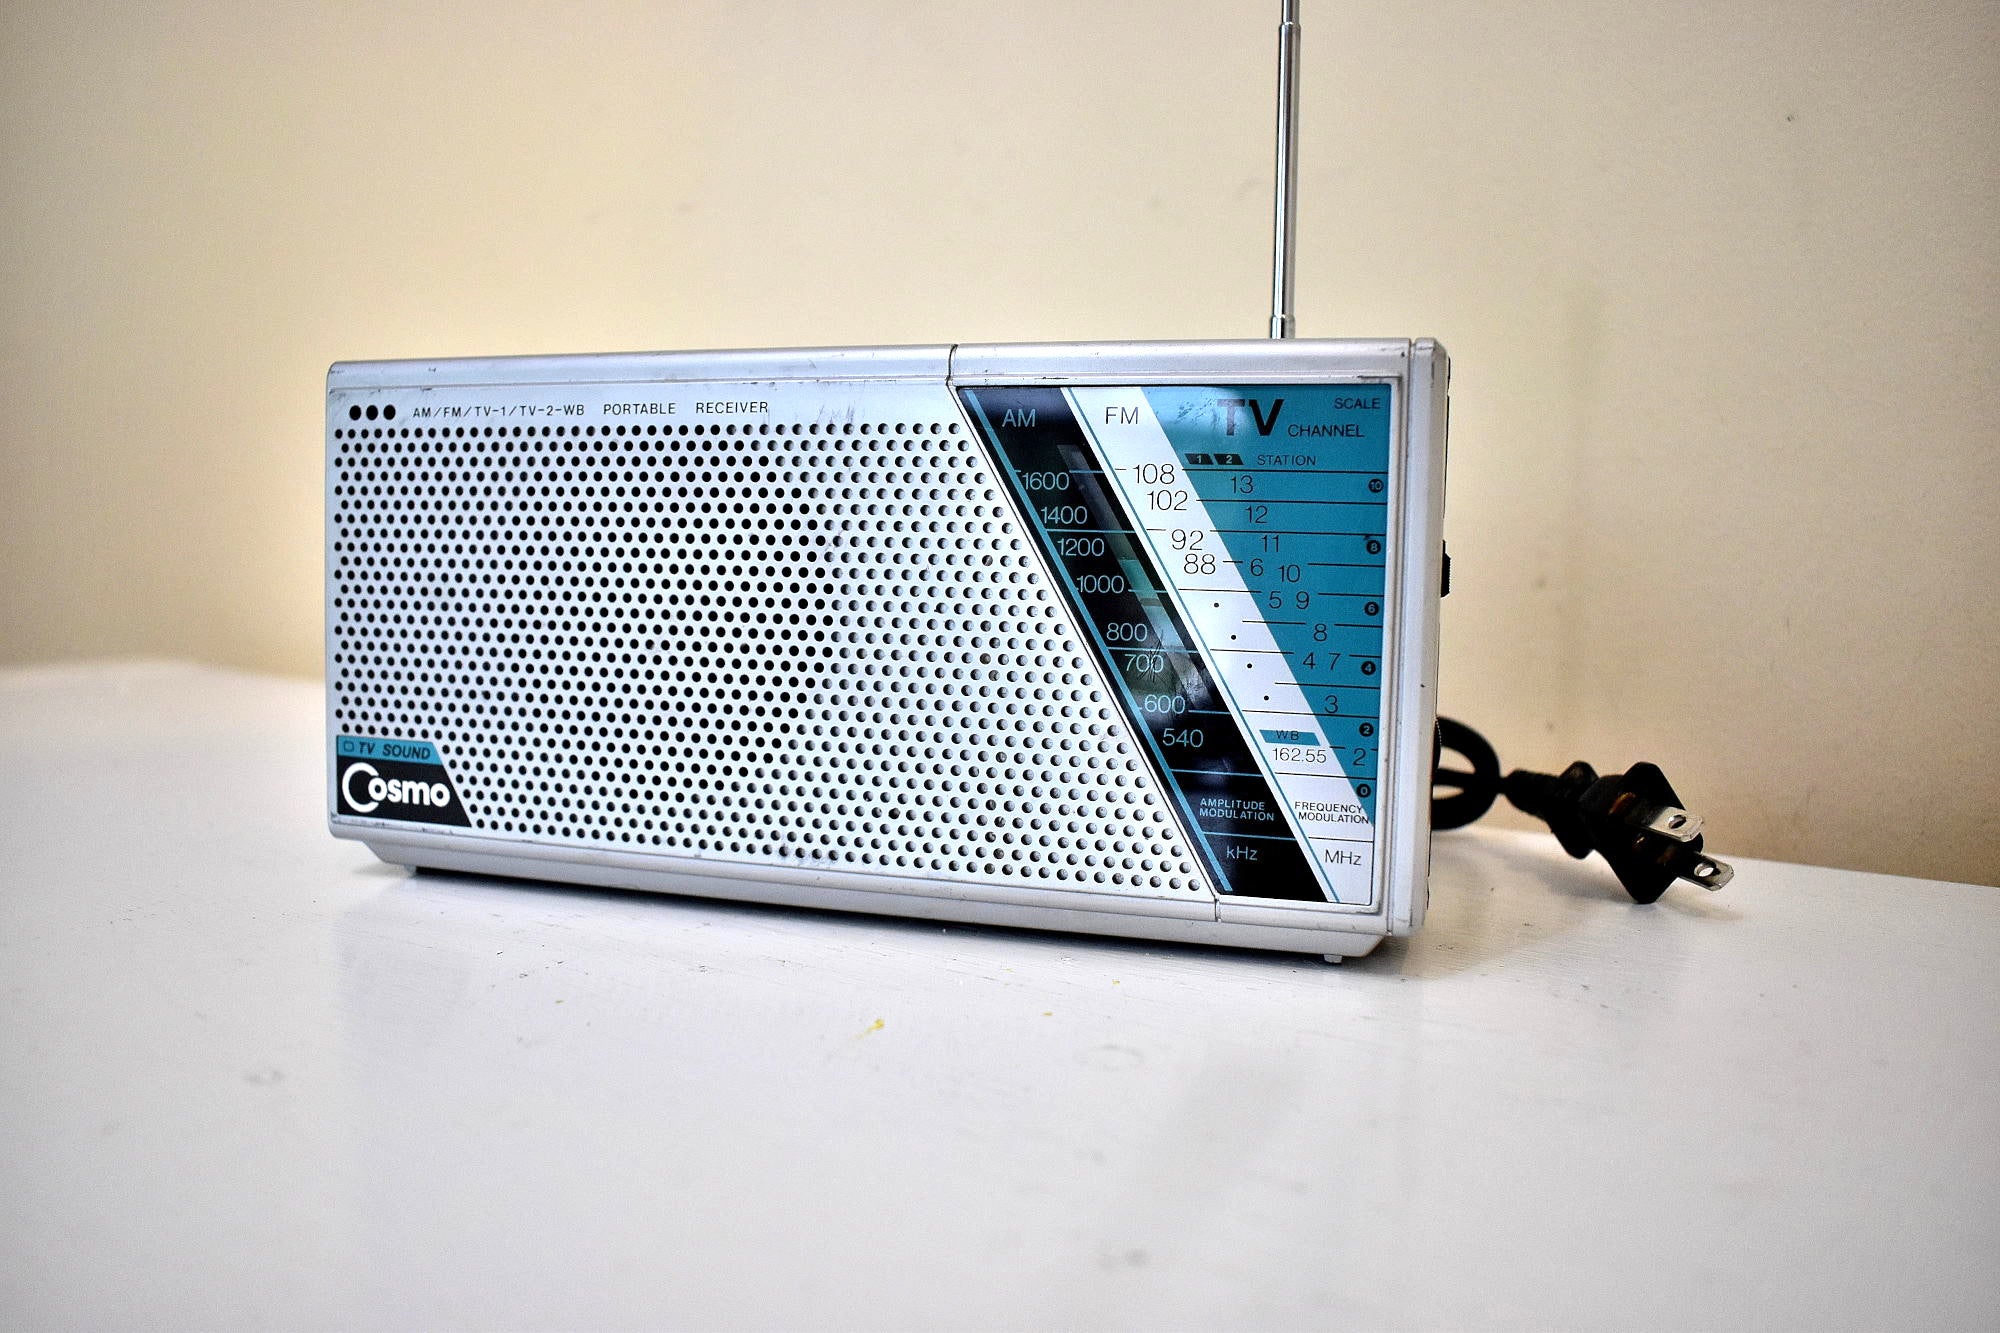 Silver Streak Cosmo TV Sound Late 80s Model R-2407 Portable Solid State AM/FM Radio Sounds Great!